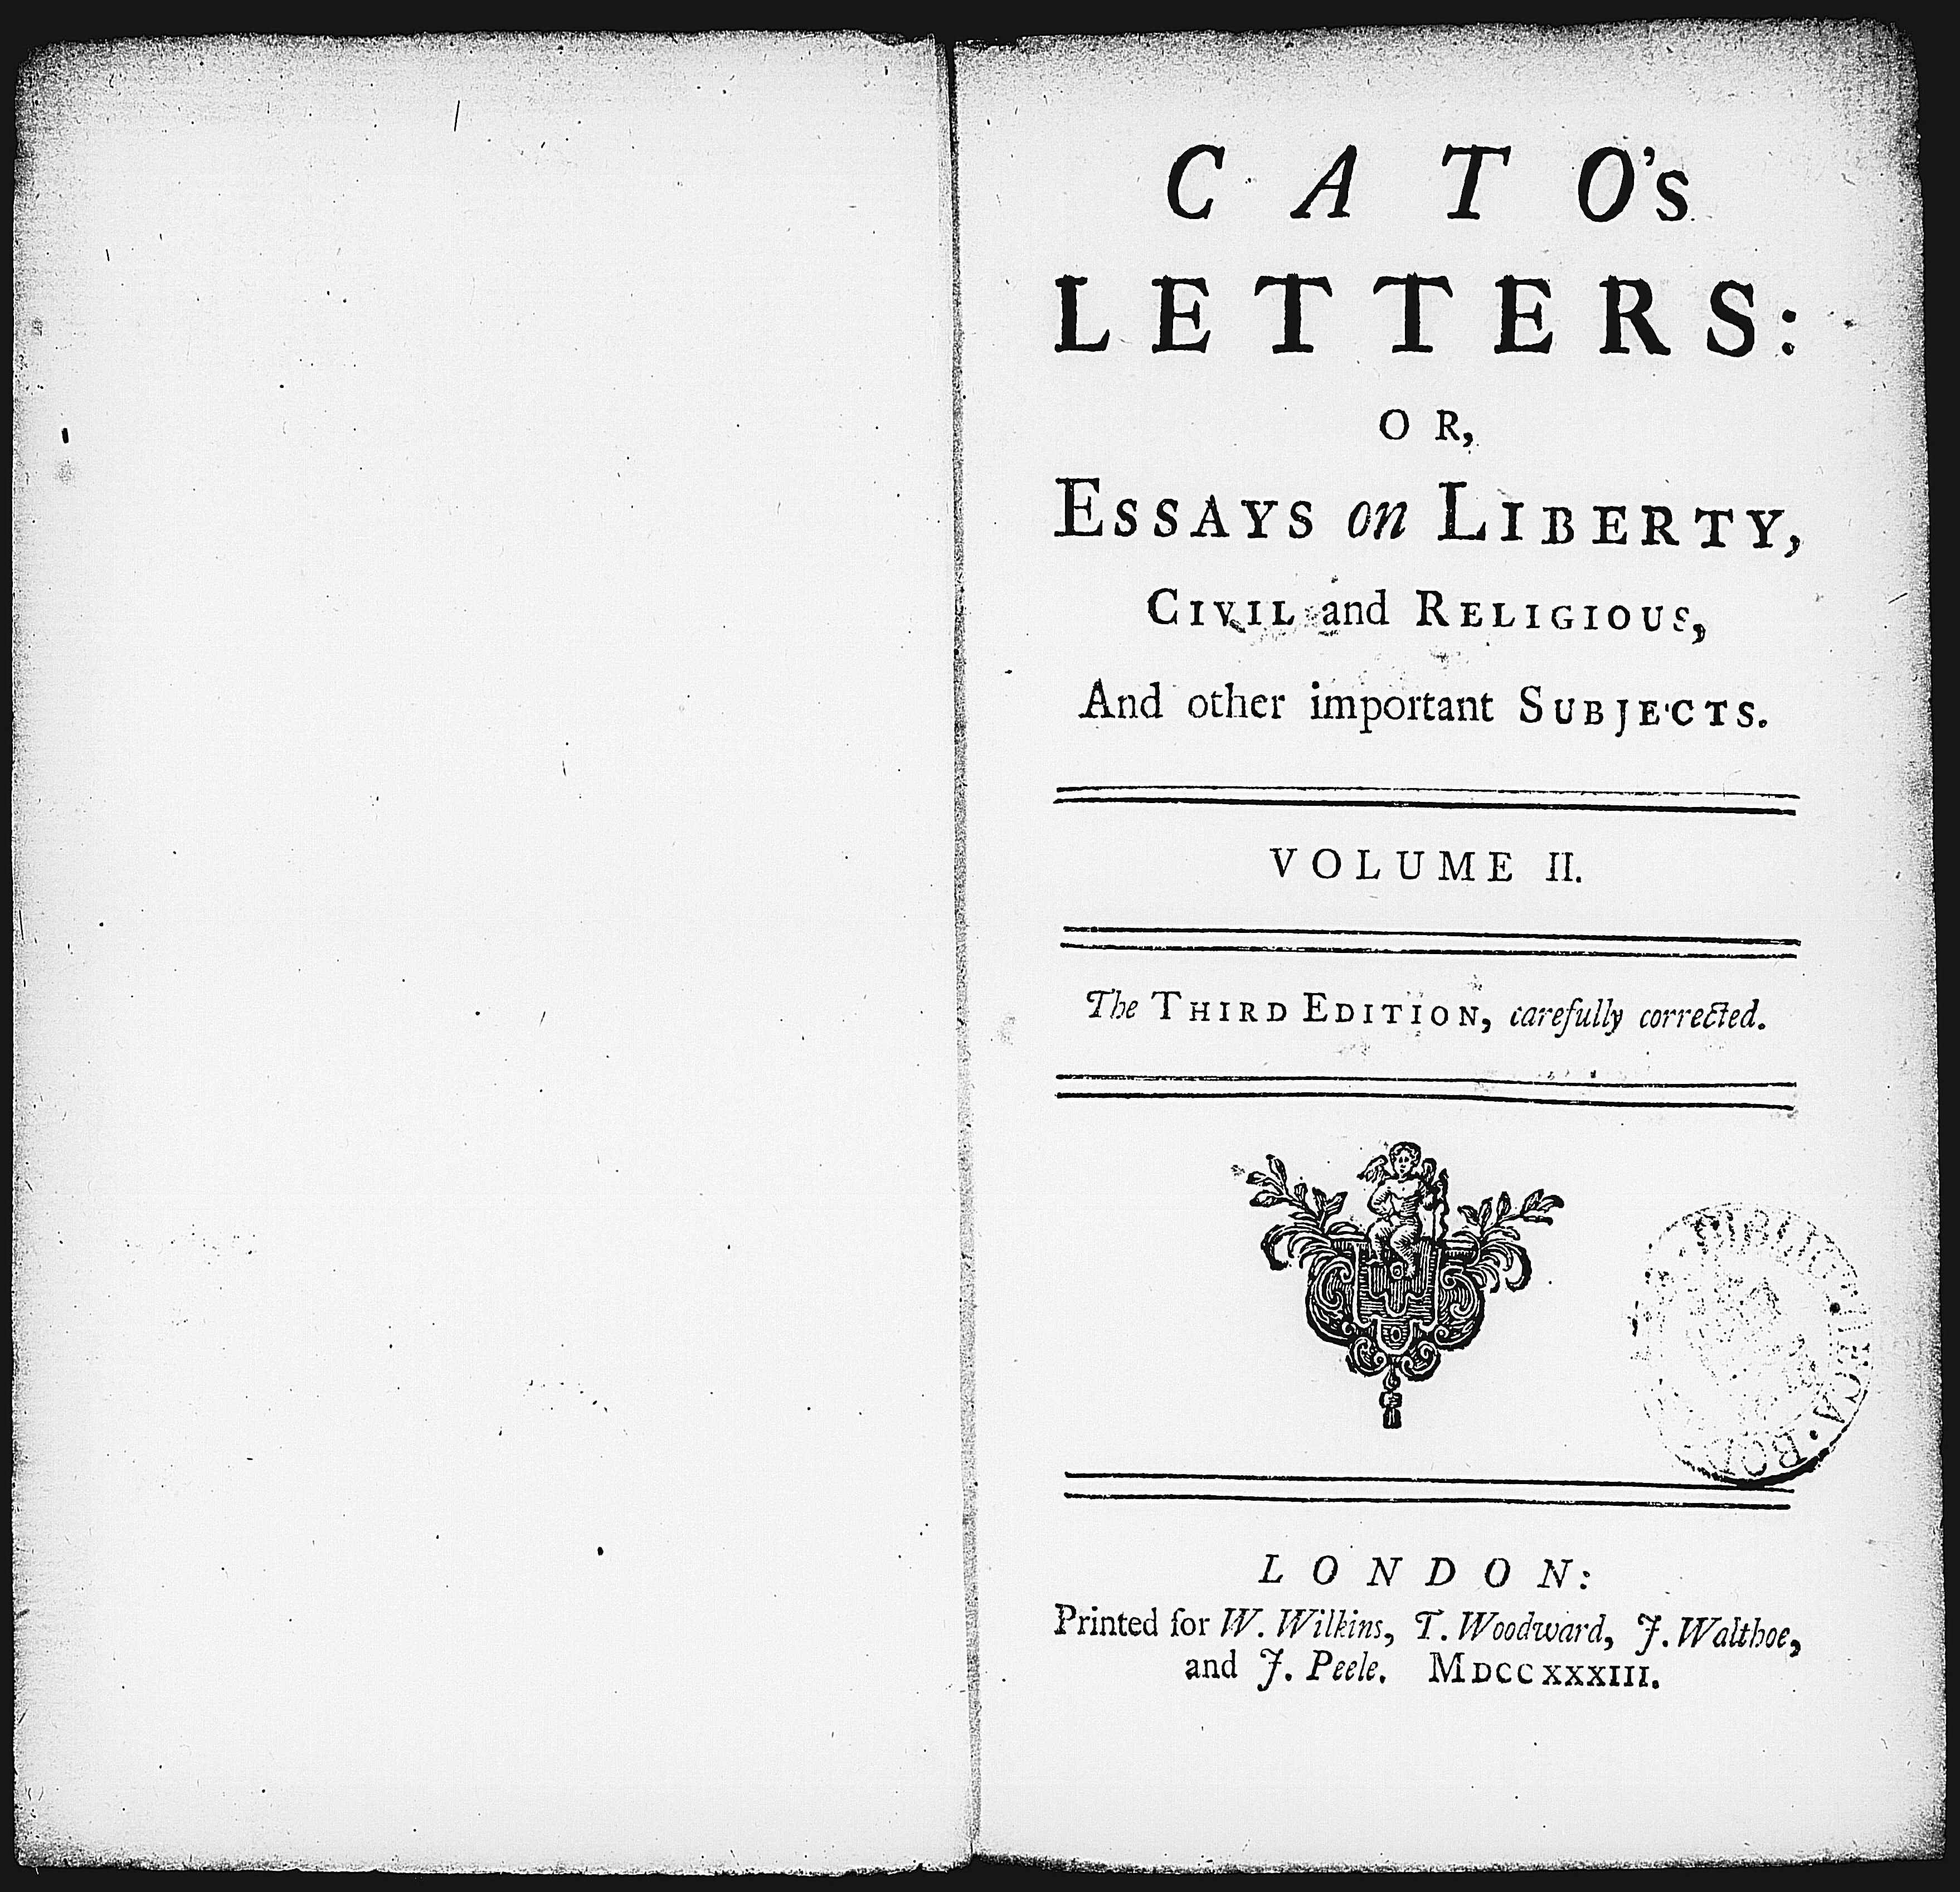 Cato's Letters, © Bodleian Library, University of Oxford